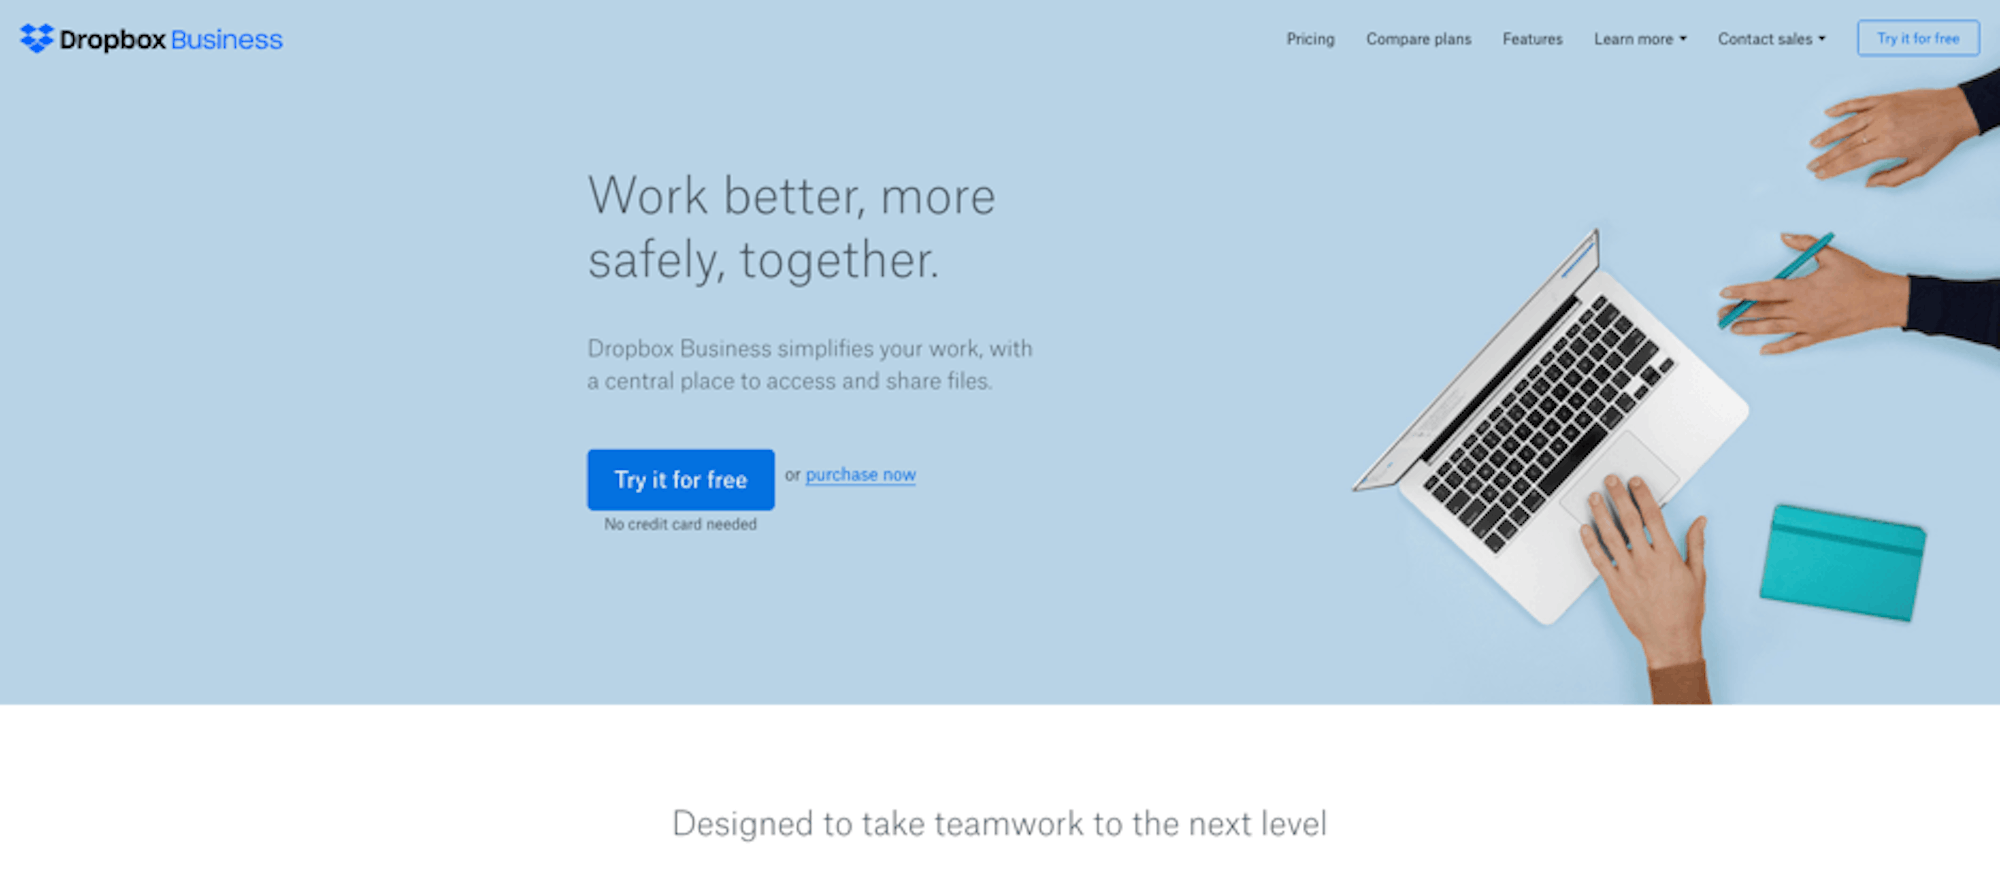 Dropbox's home page for business's. Value proposition really captures visitor's attention. "Work better" gives audience incentive to stay and read more.